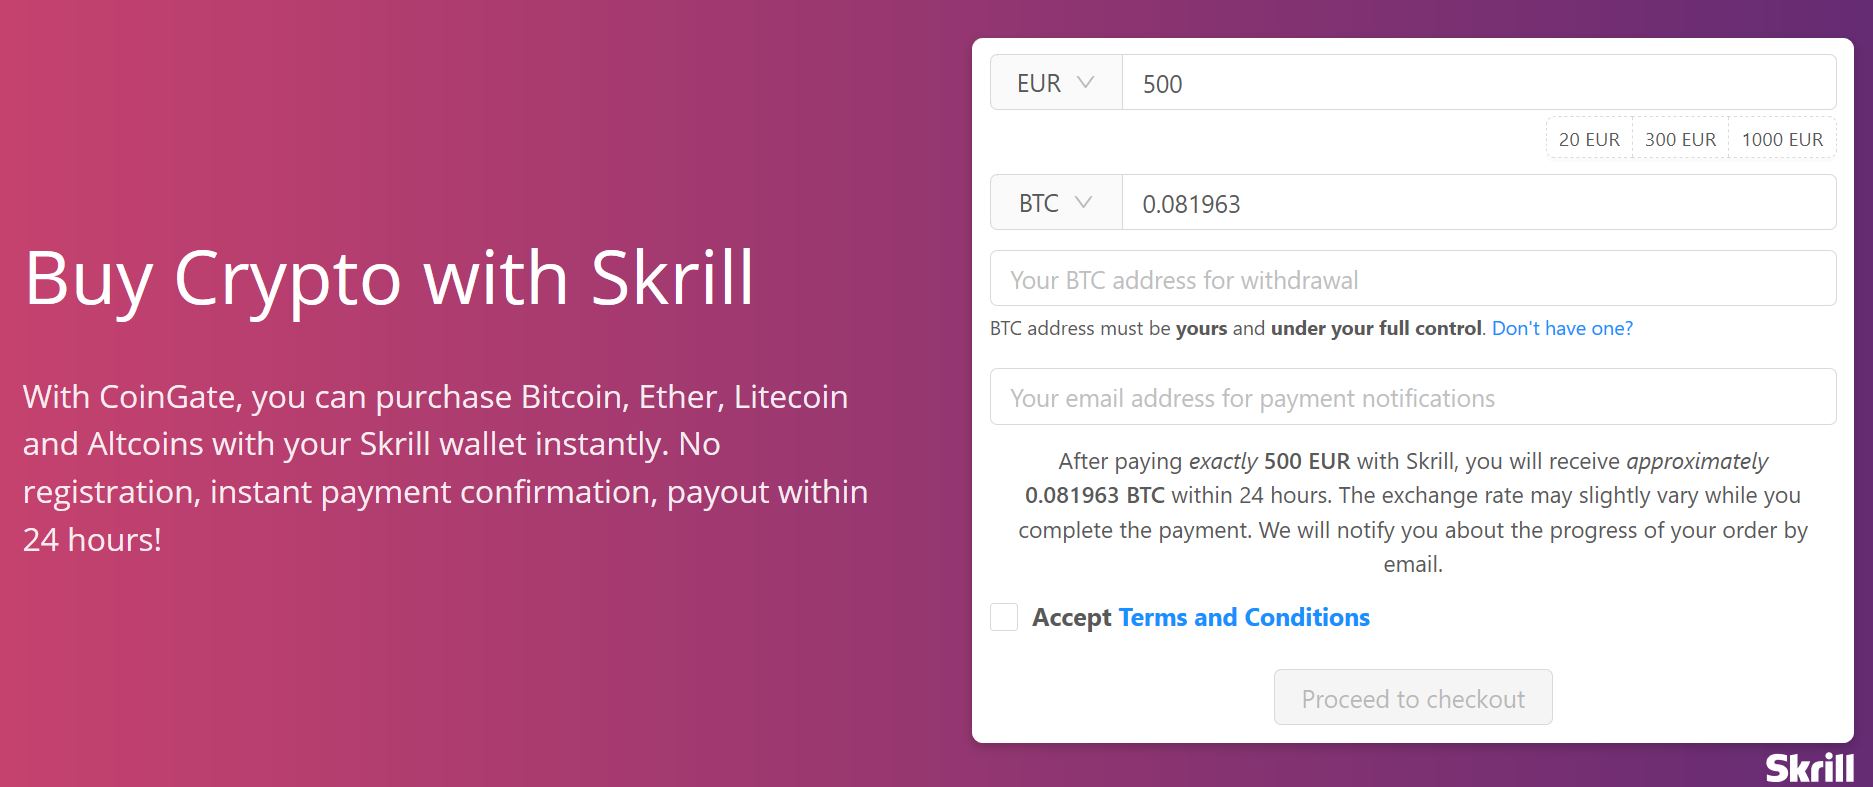 Buy with Skrill - CoinGate